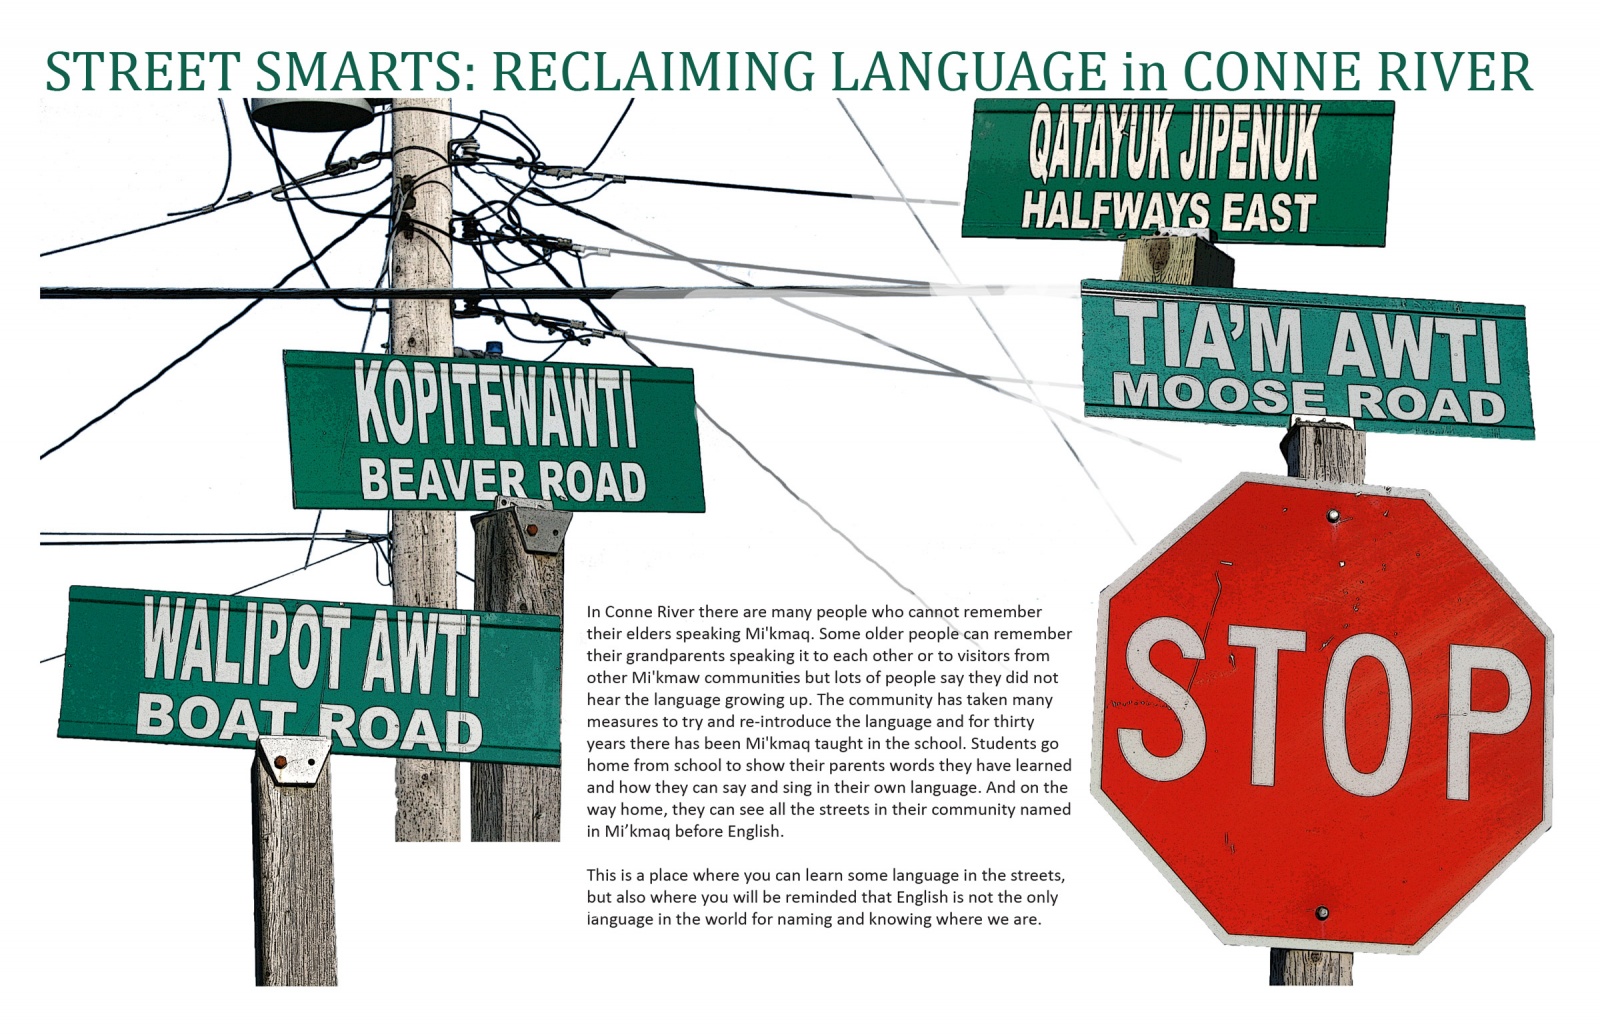 Street Smarts: Reclaiming Language in Conne River